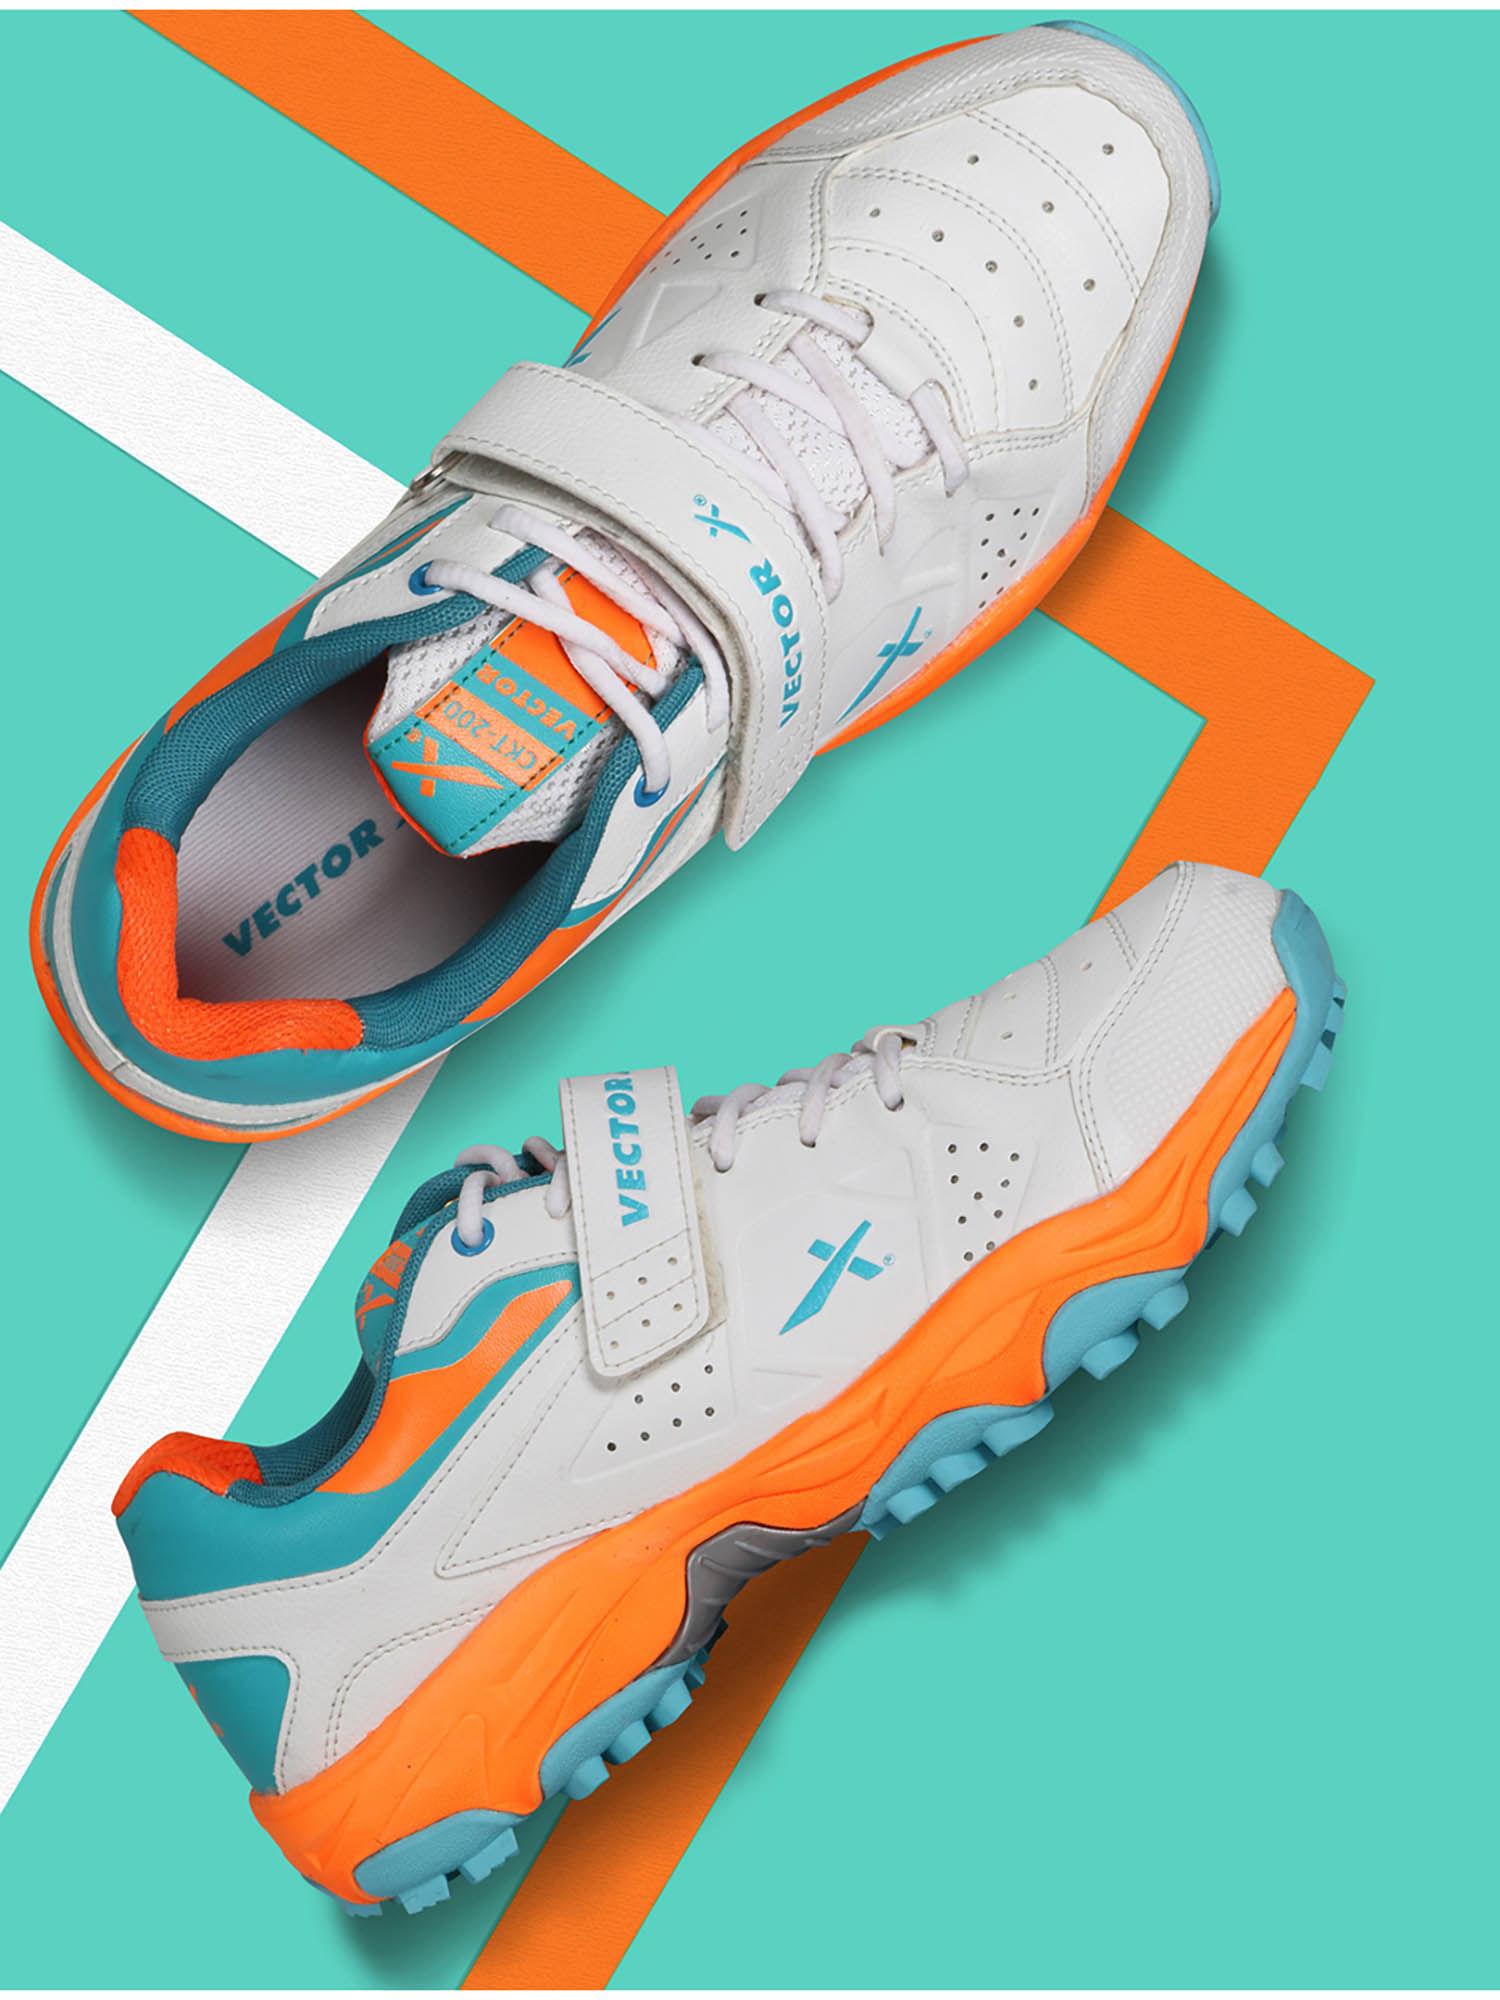 ckt-200-without-spikes-cricket-shoes-white,-blue-&-orange